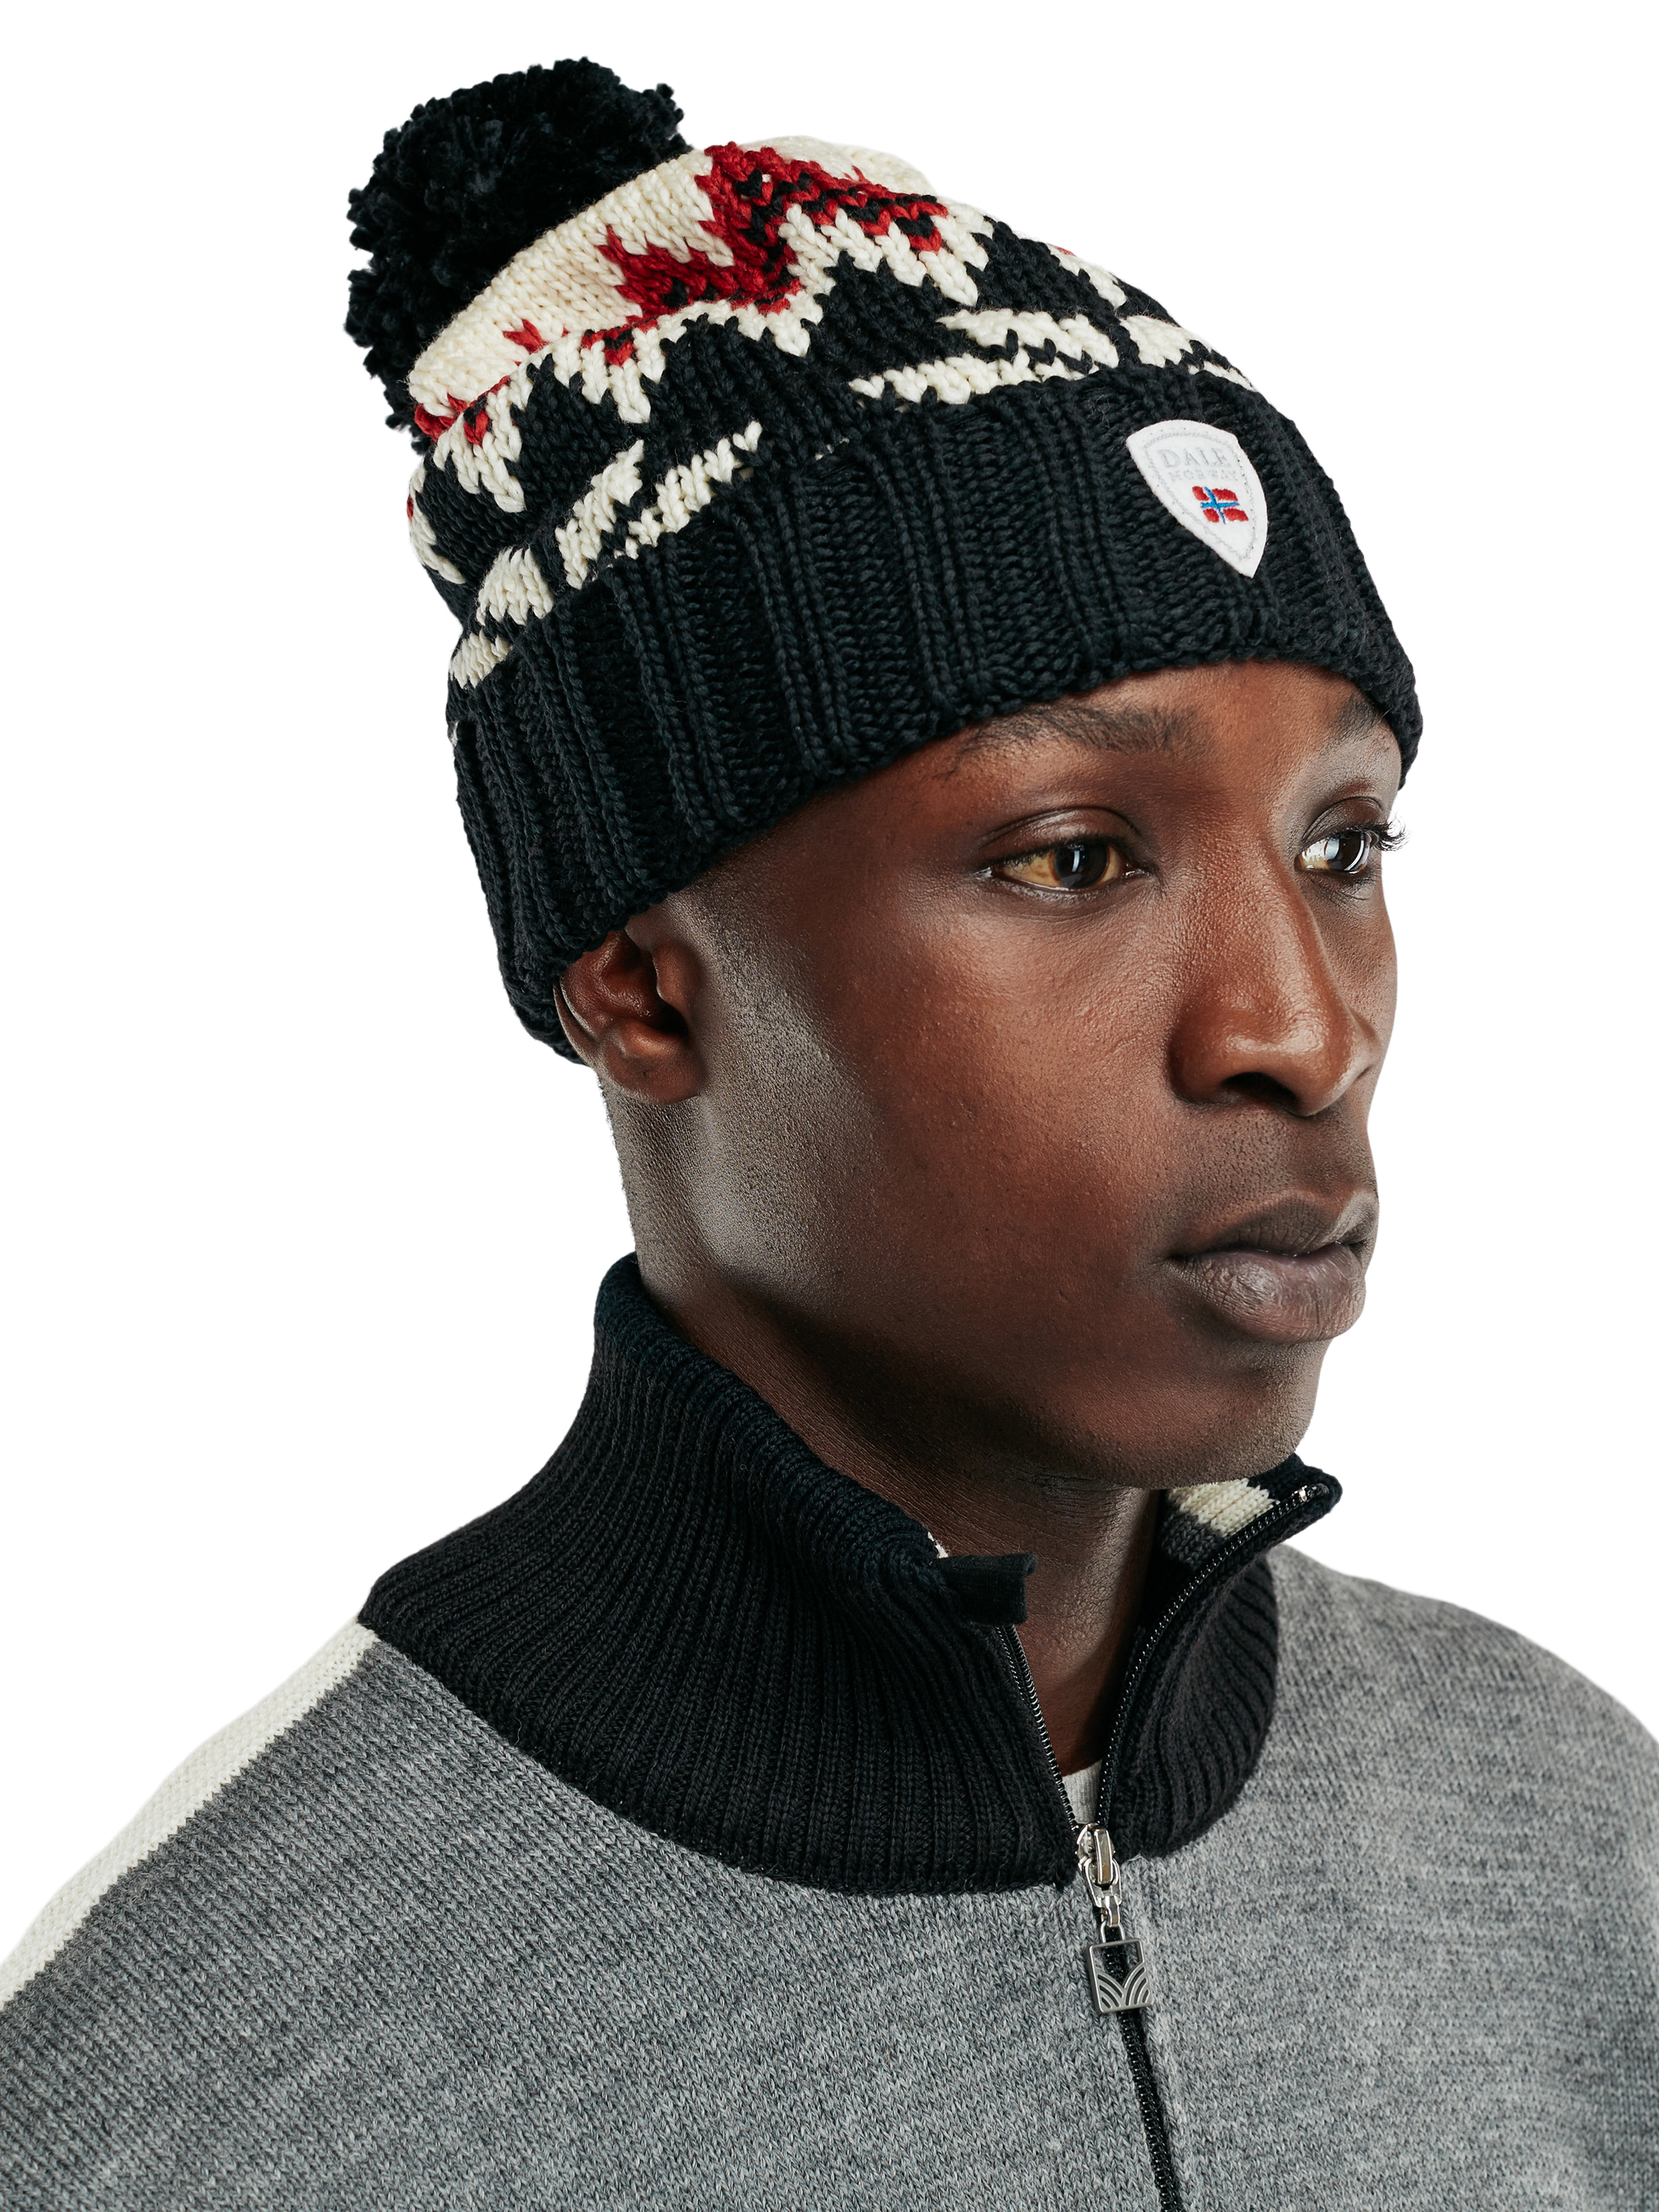 Dale of Norway DALE of NORWAY Olympics 100% Merino Wool BOBBLE HAT Unisex MADE in NORWAY 7054880375331 